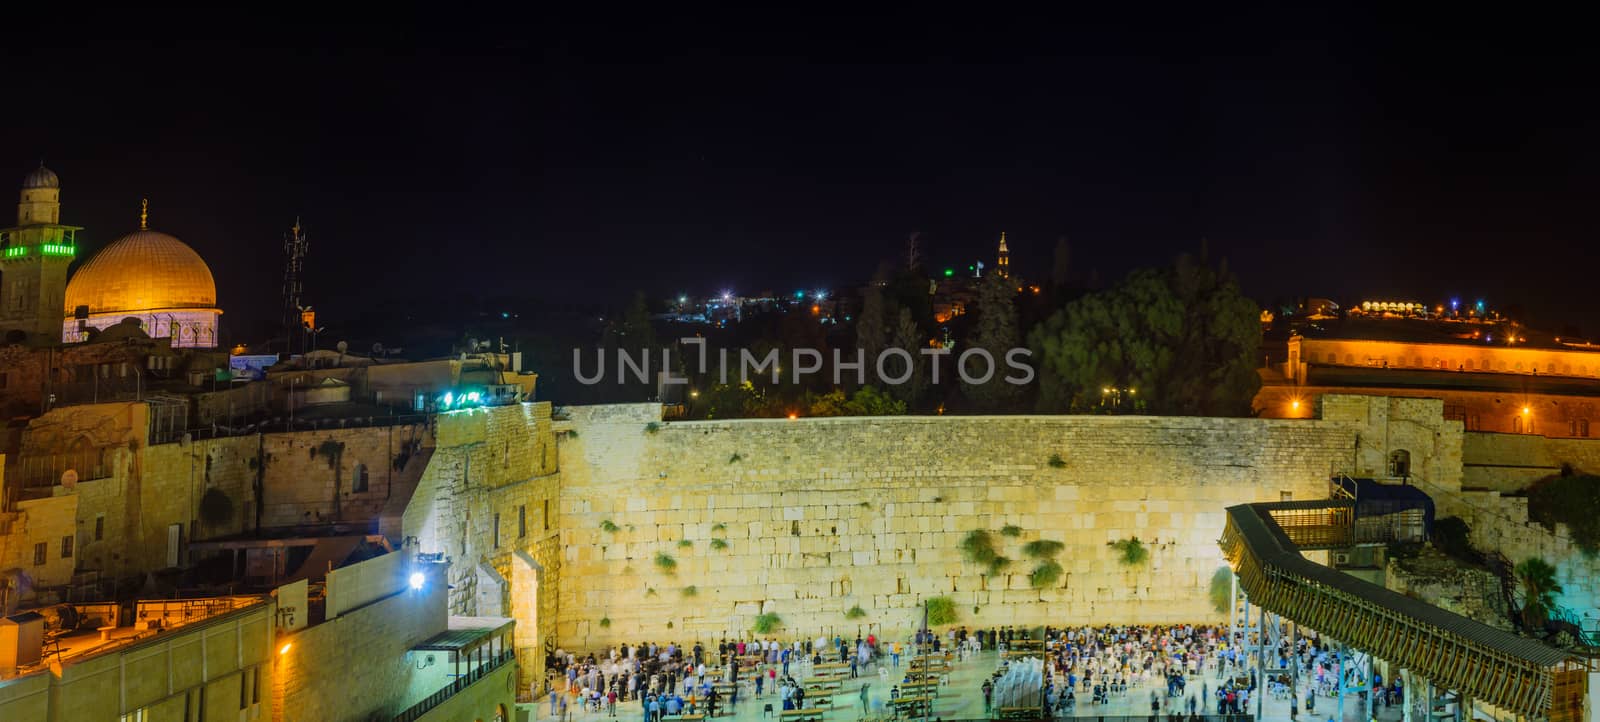 JERUSALEM, ISRAEL - SEPTEMBER 06, 2017:  Night scene of the Western Wall with Jewish prayers, and the Dome of the Rock in the background, in Jerusalem, Israel